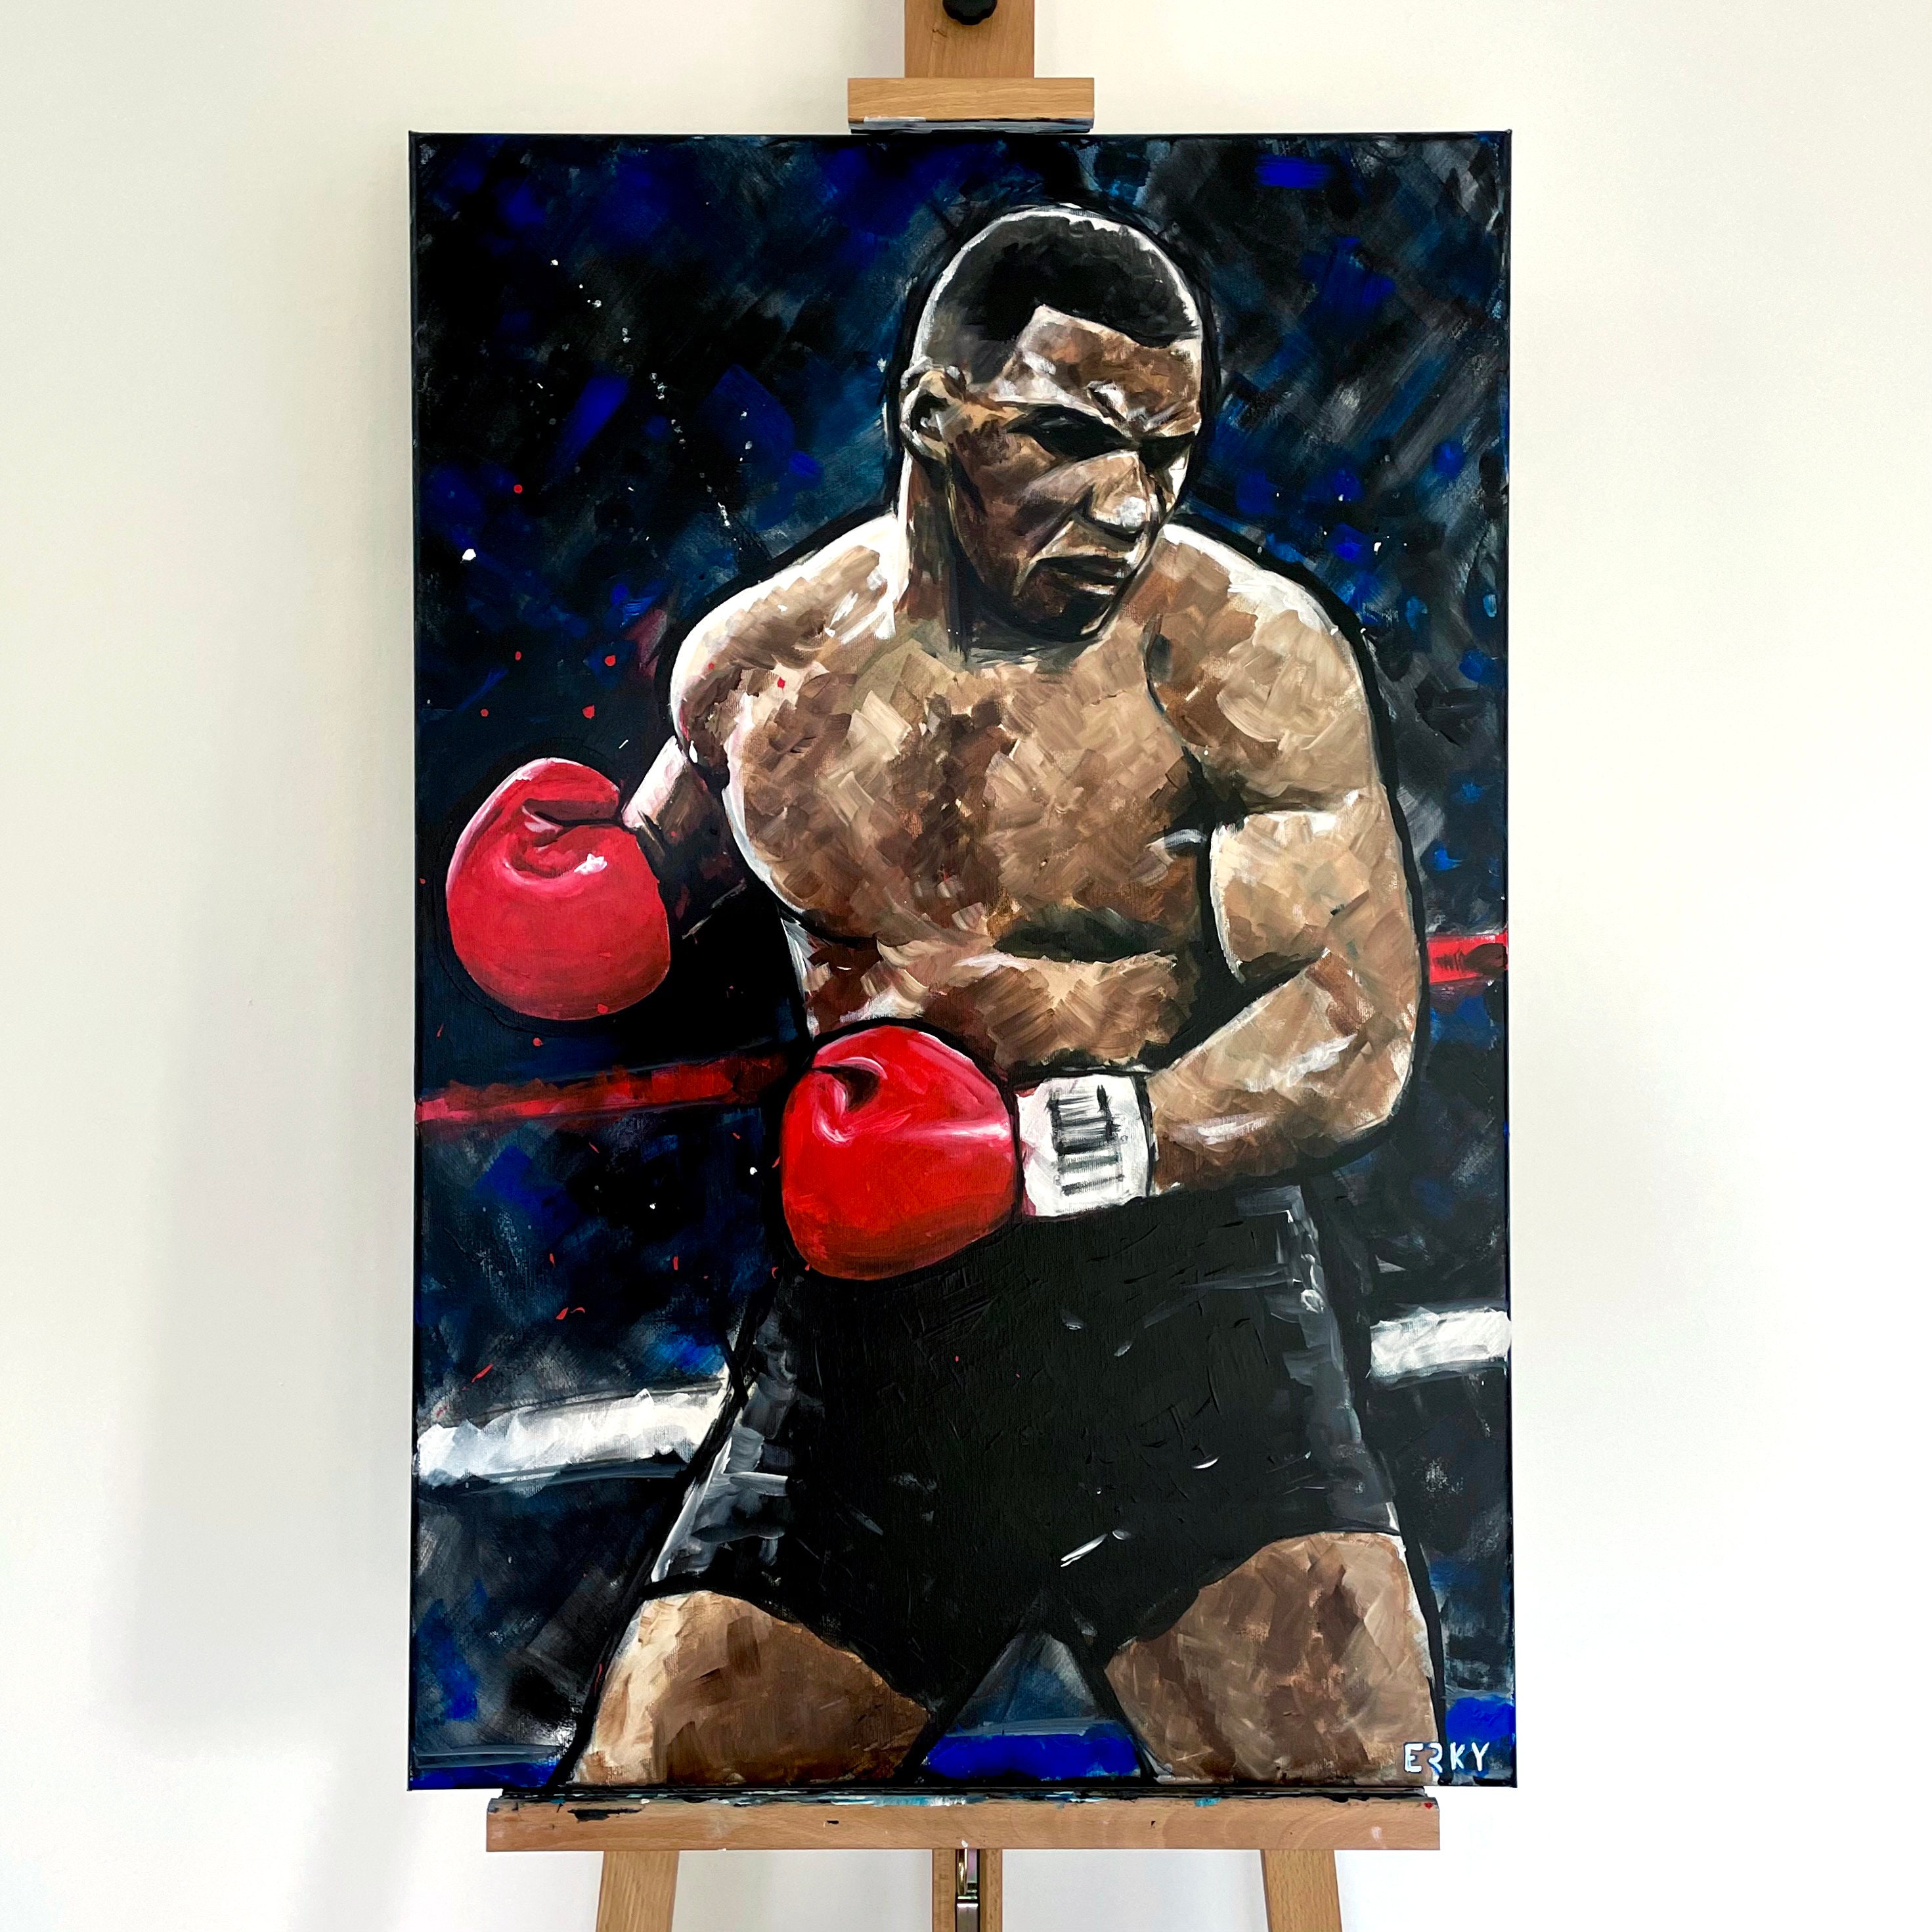 Mike Tyson Acrylic Painting 90x60cm Boxing Fight pic picture